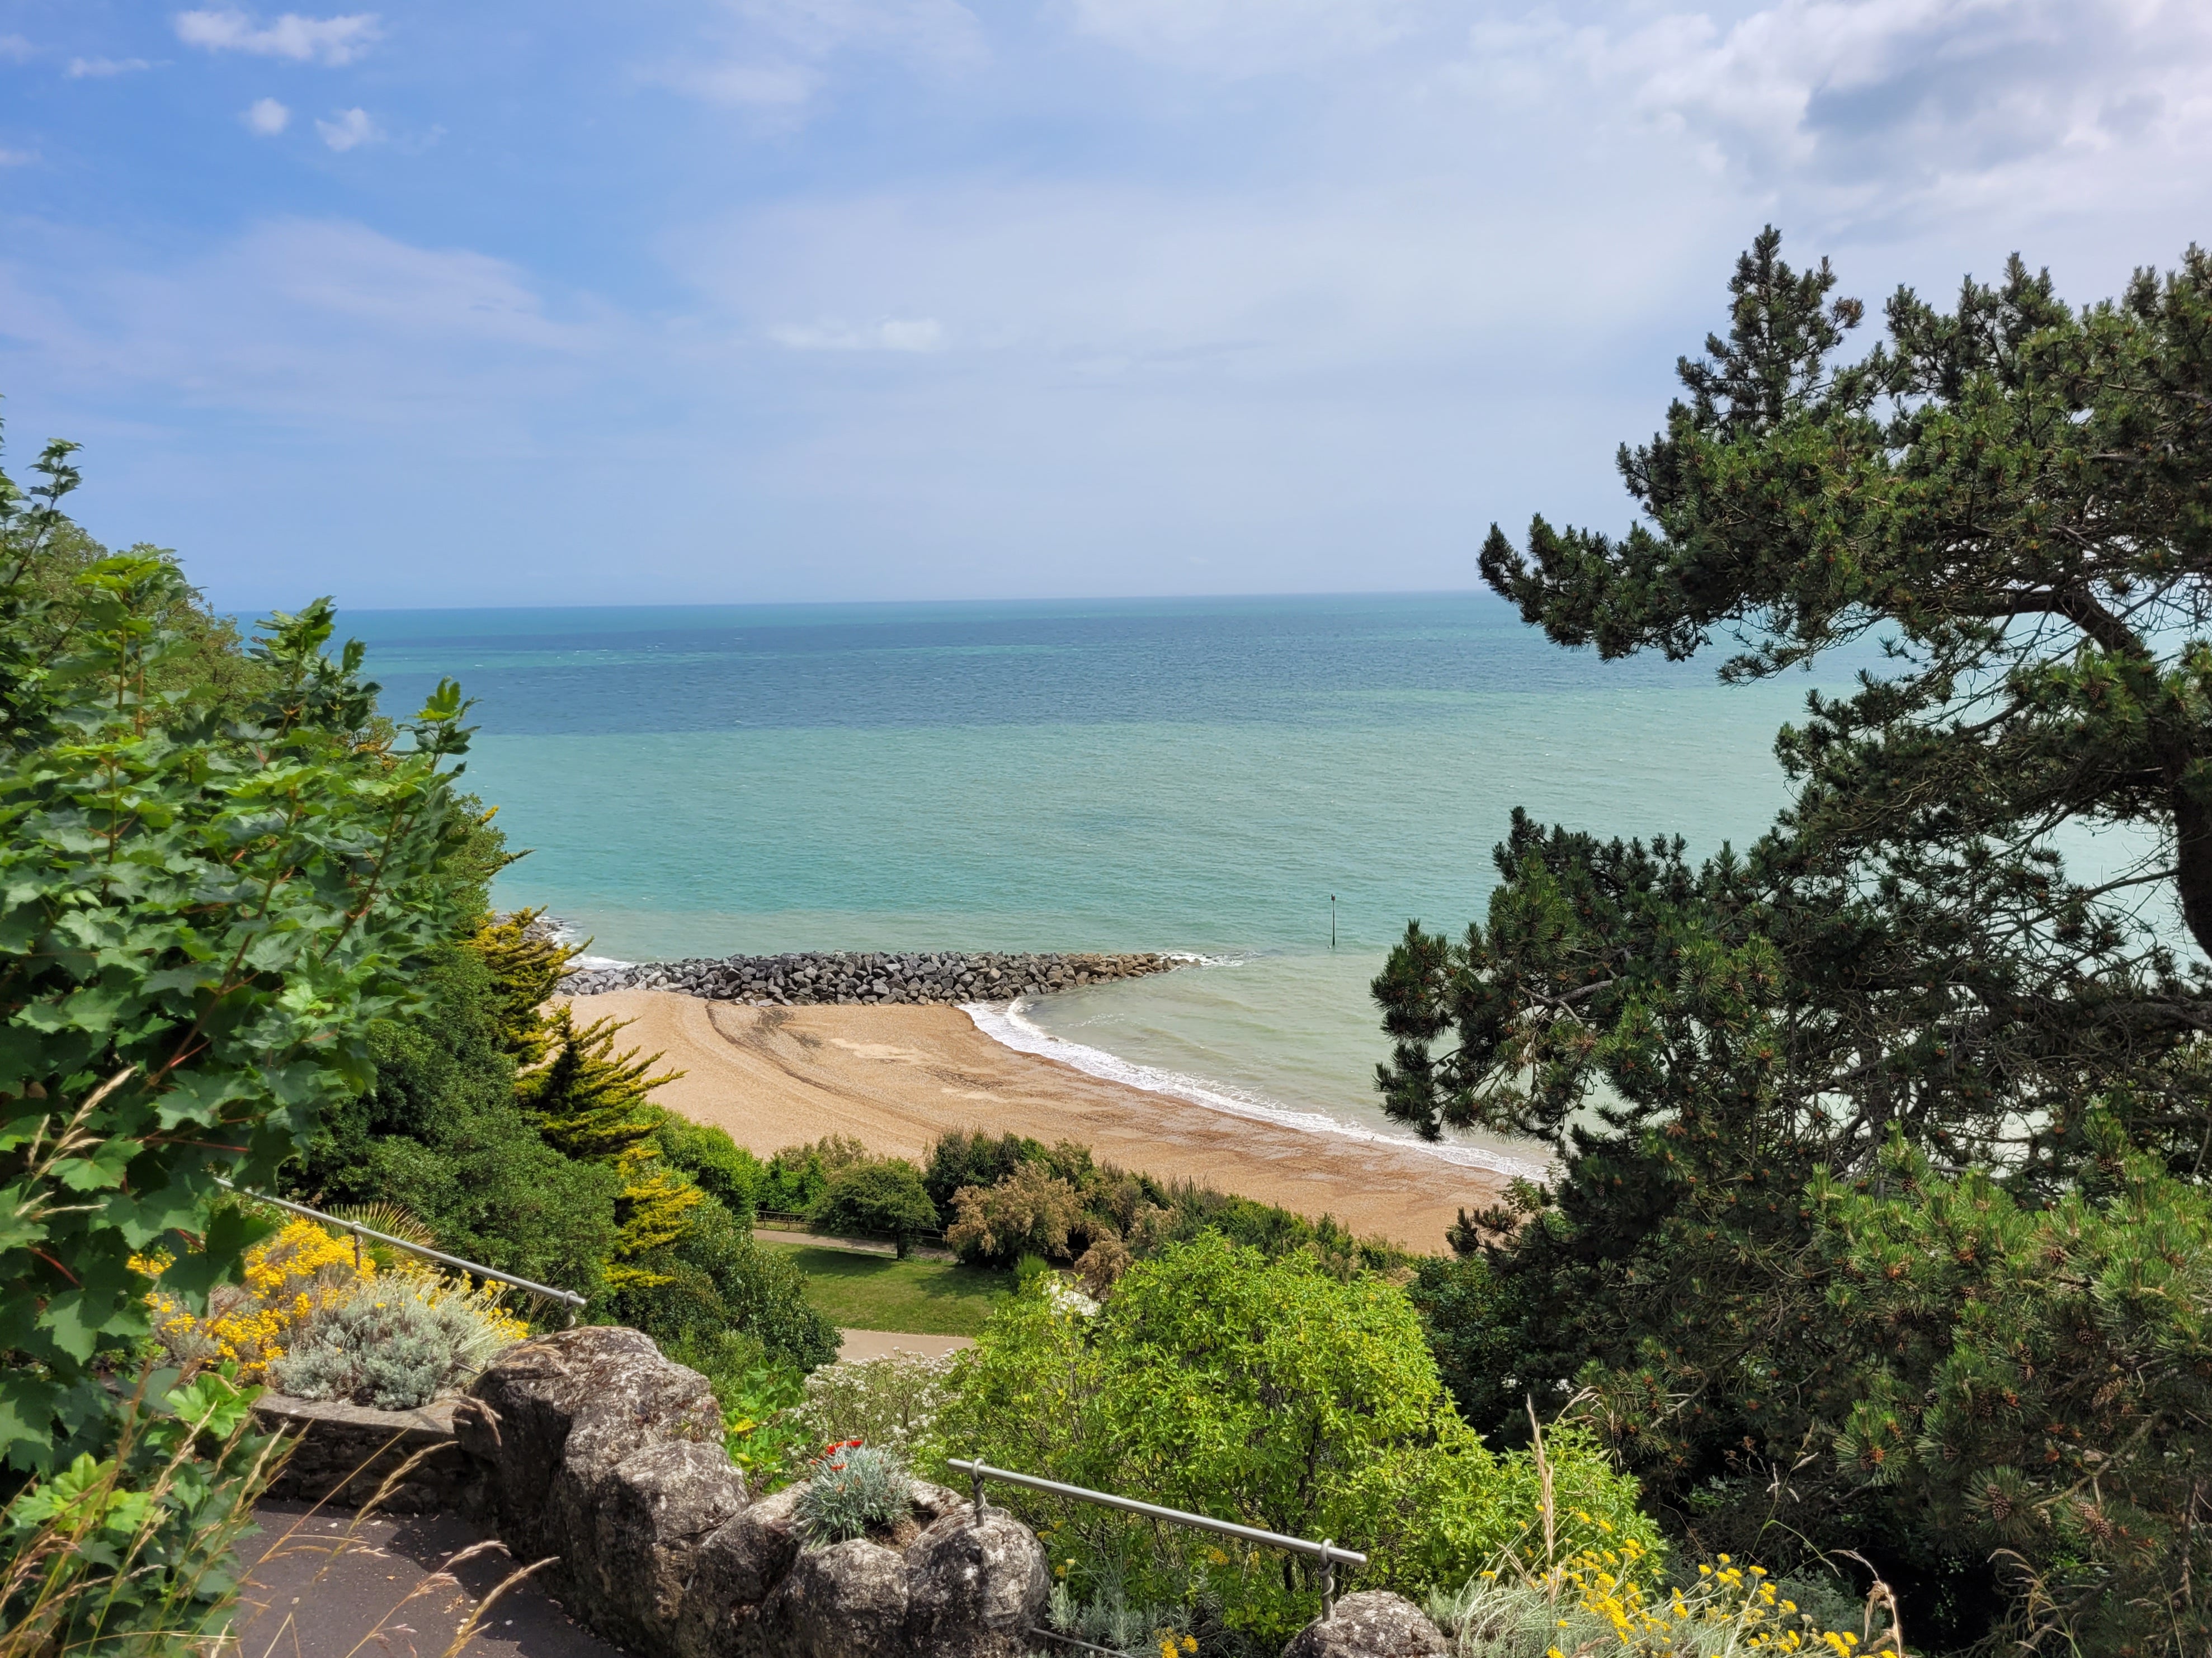 We’re all staying on a lovely holiday: Mermaid Beach in Folkestone